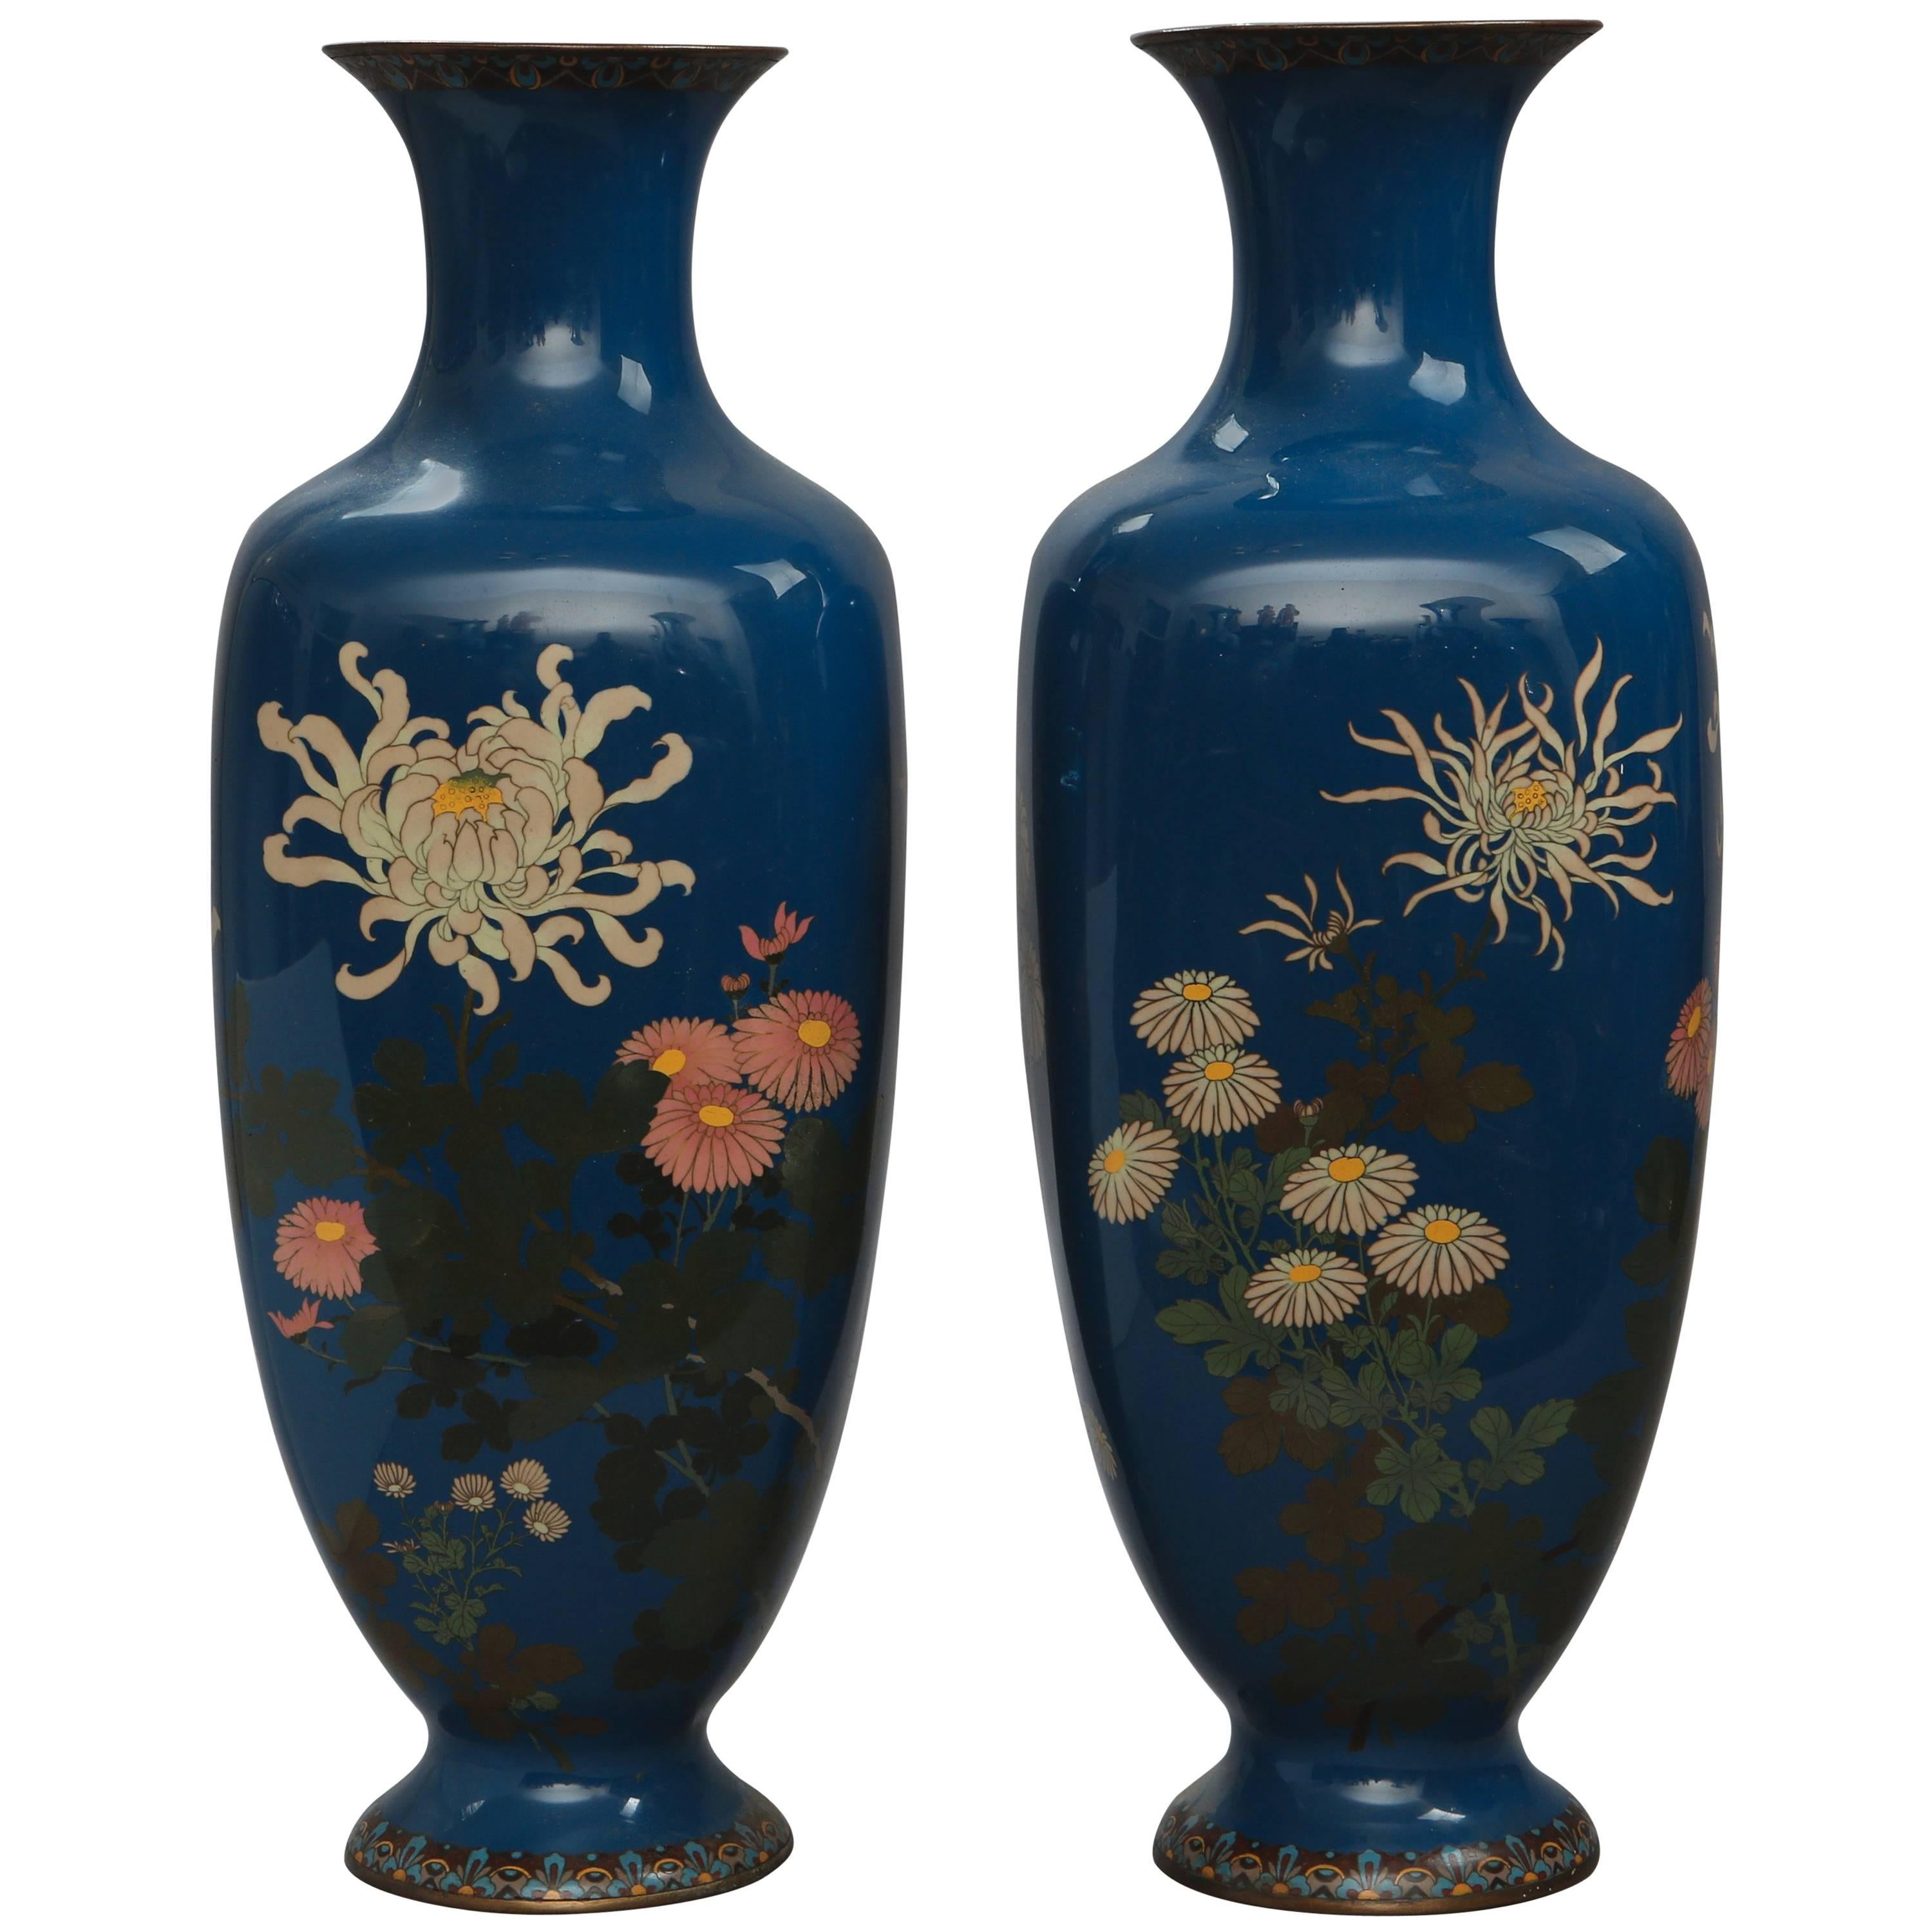 Pair of 19th Century Japanese Cloisonné Square-Shaped Vases with Flaring Necks For Sale